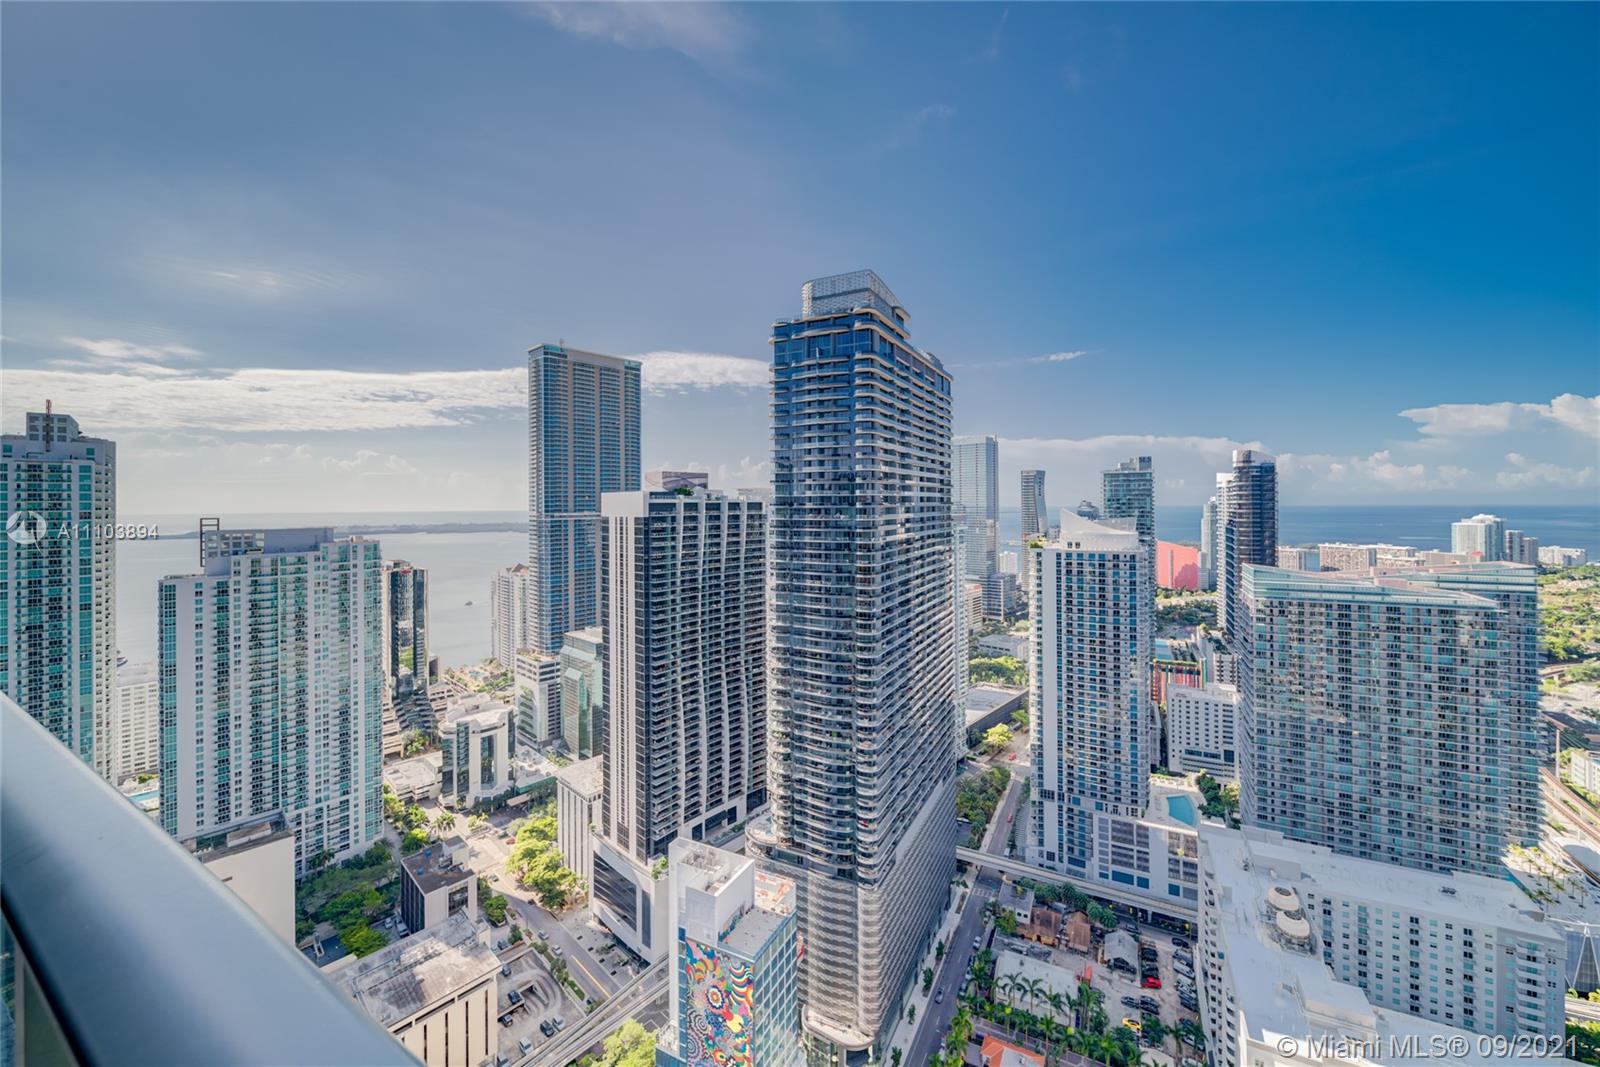 This unique unit on the 47th floor offers you views from the balcony that circle the Miami Skyline & Bay area to view both sunrise and sunset.  Unit features 12 FT ceilings with panoramic views from every room along with an open layout floor plan.